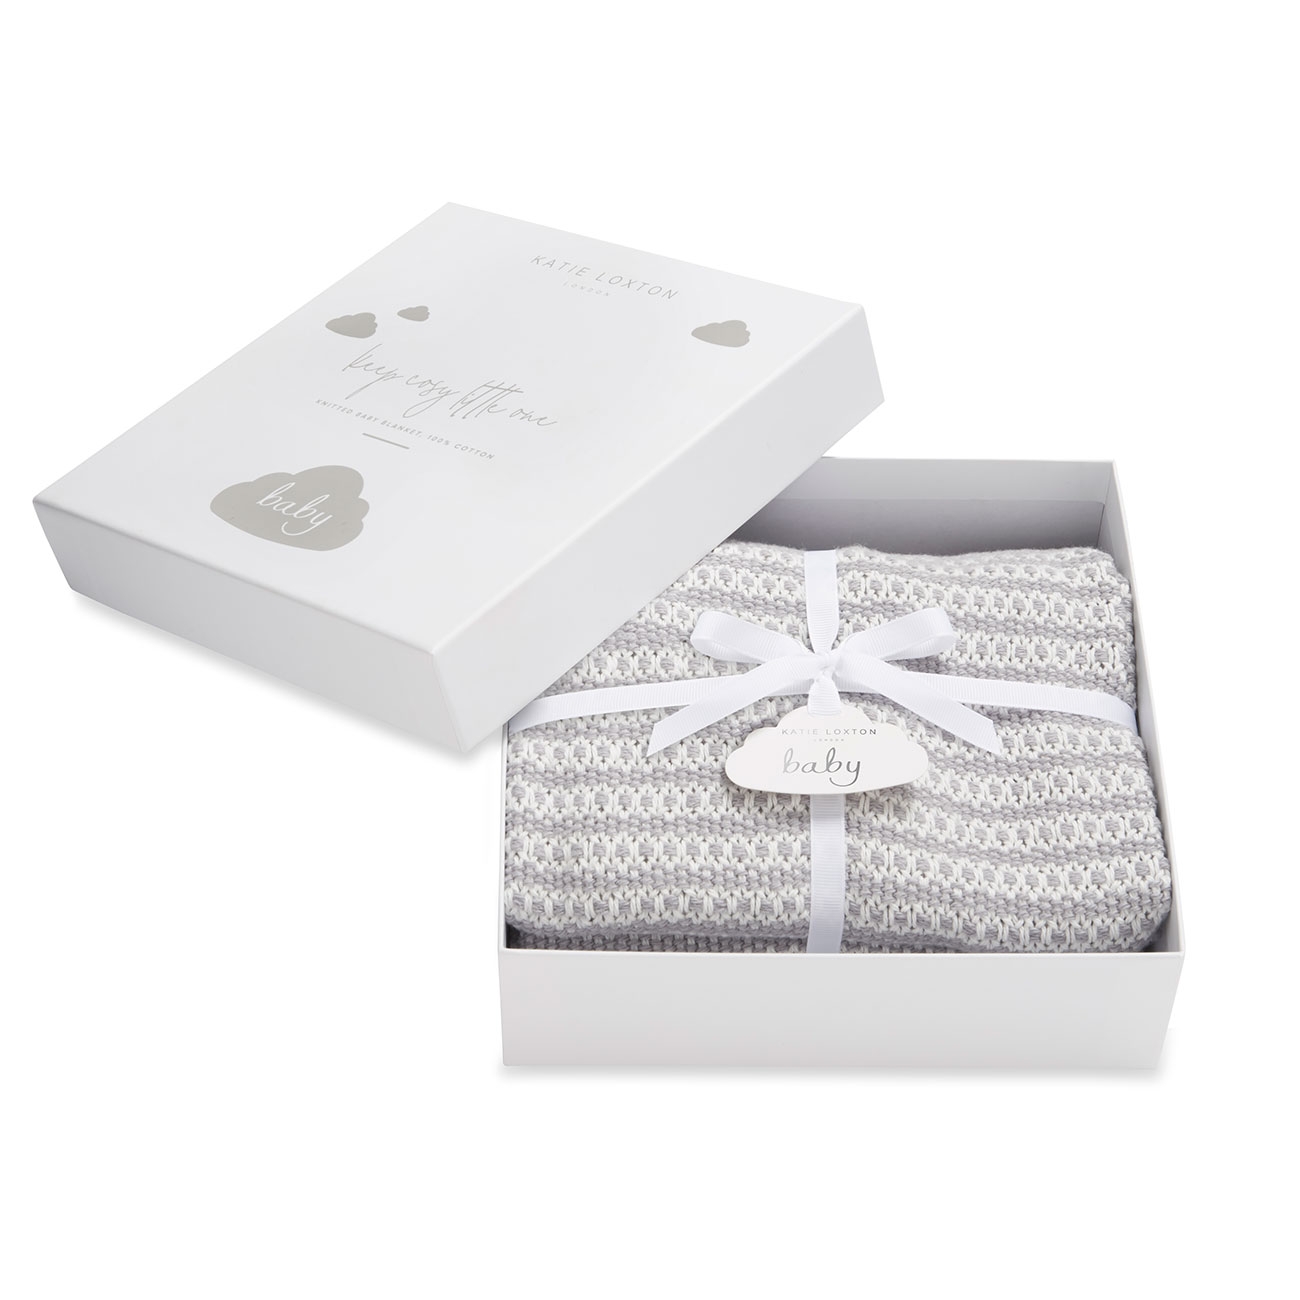 Katie Loxton Cotton Knitted Baby Blanket – Grey